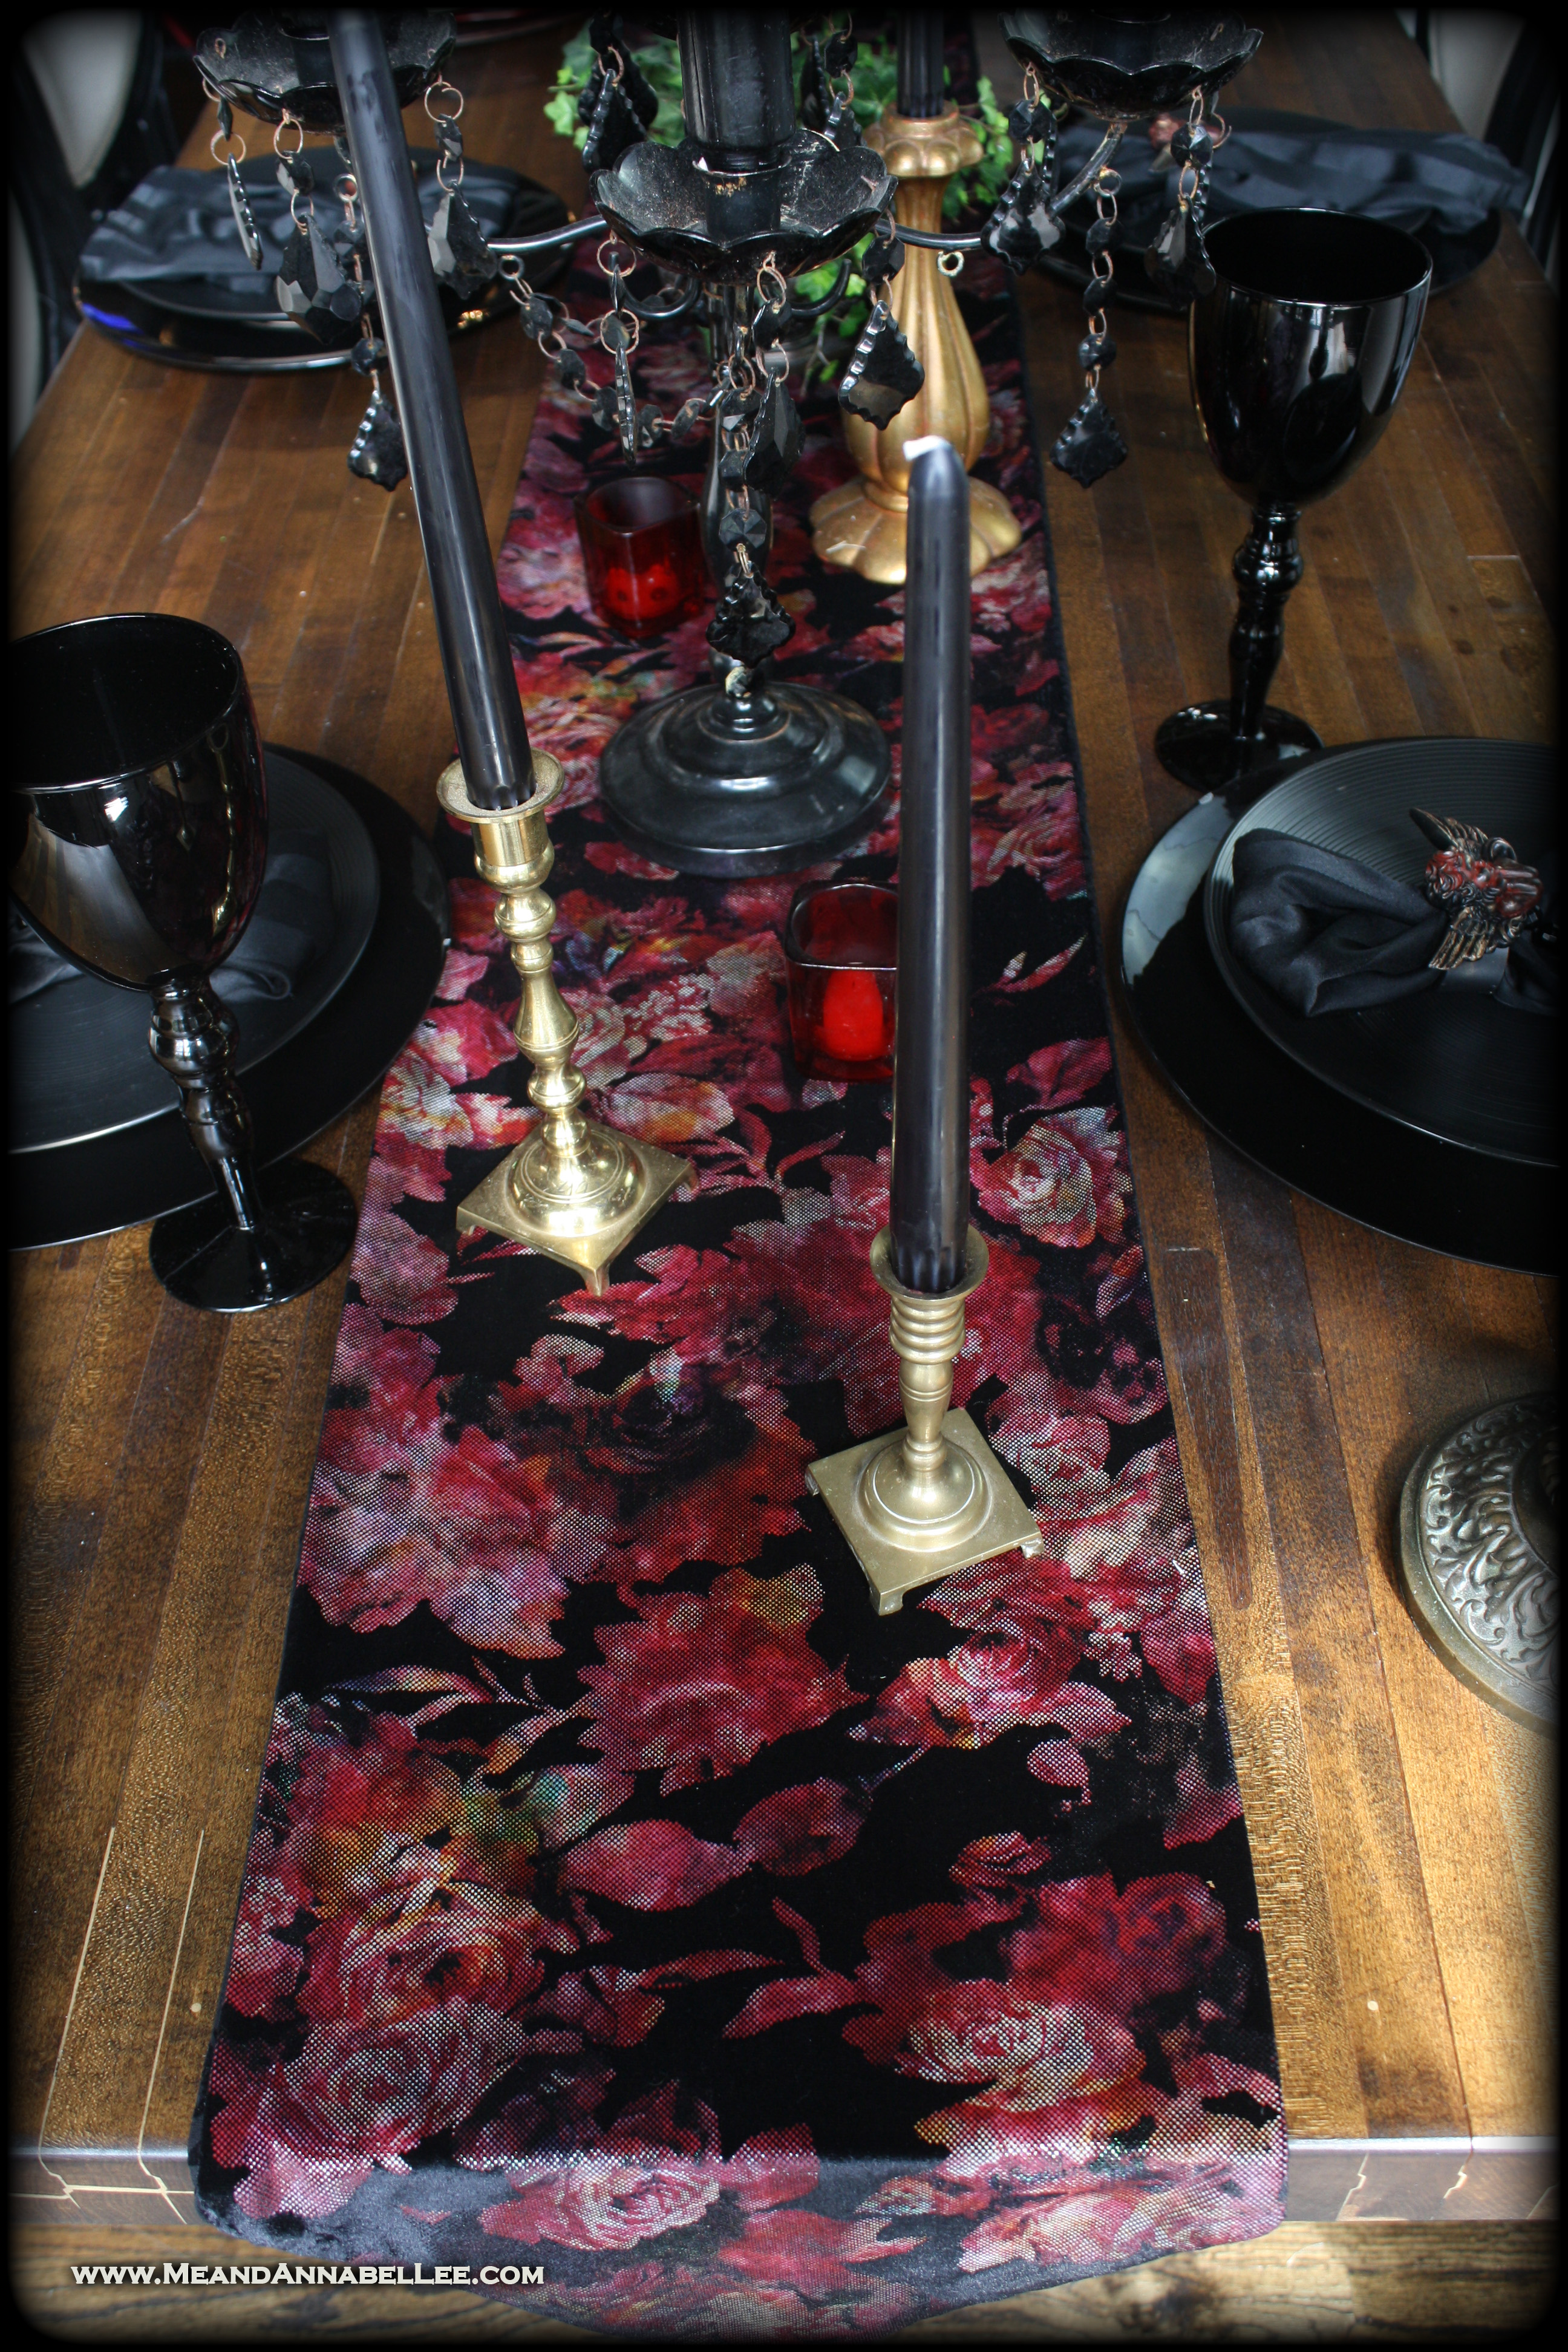 How to Make this DIY Double Sided Victorian Gothic Table Runner | Metallic Velvet Roses | Goth Home Decor | Table Setting | www.MeandAnnabelLee.com